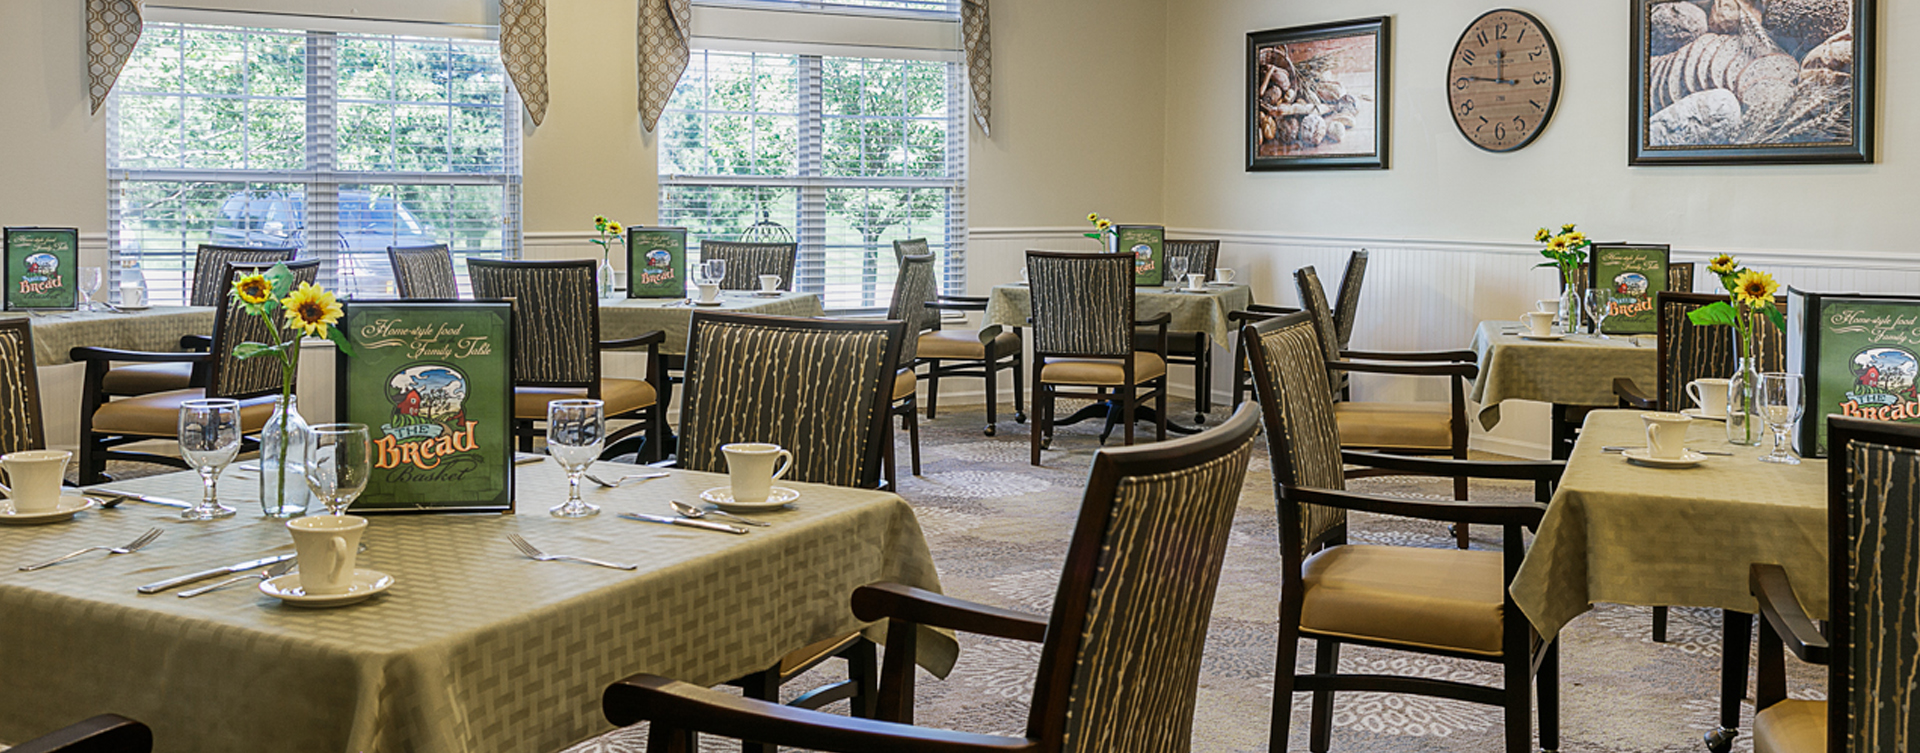 Food is best when shared with friends in the dining room at Bickford of Marshalltown